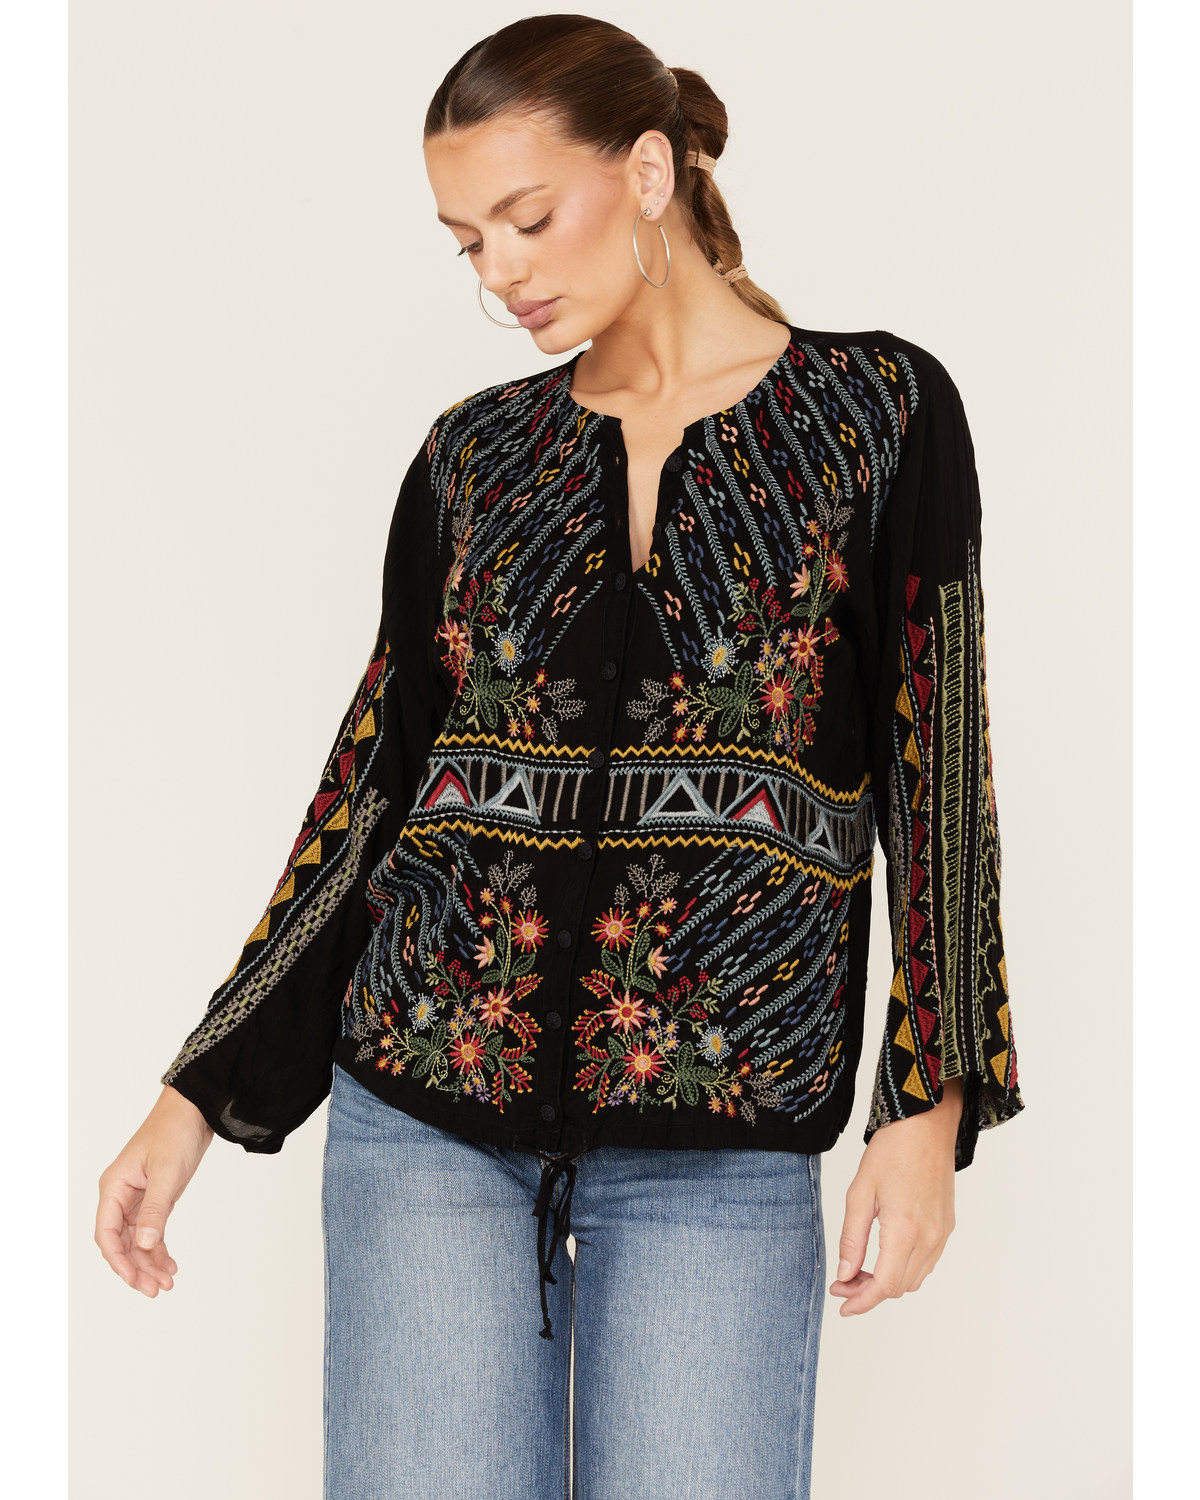 Johnny Was Women's Ezra Embroidered Blouse